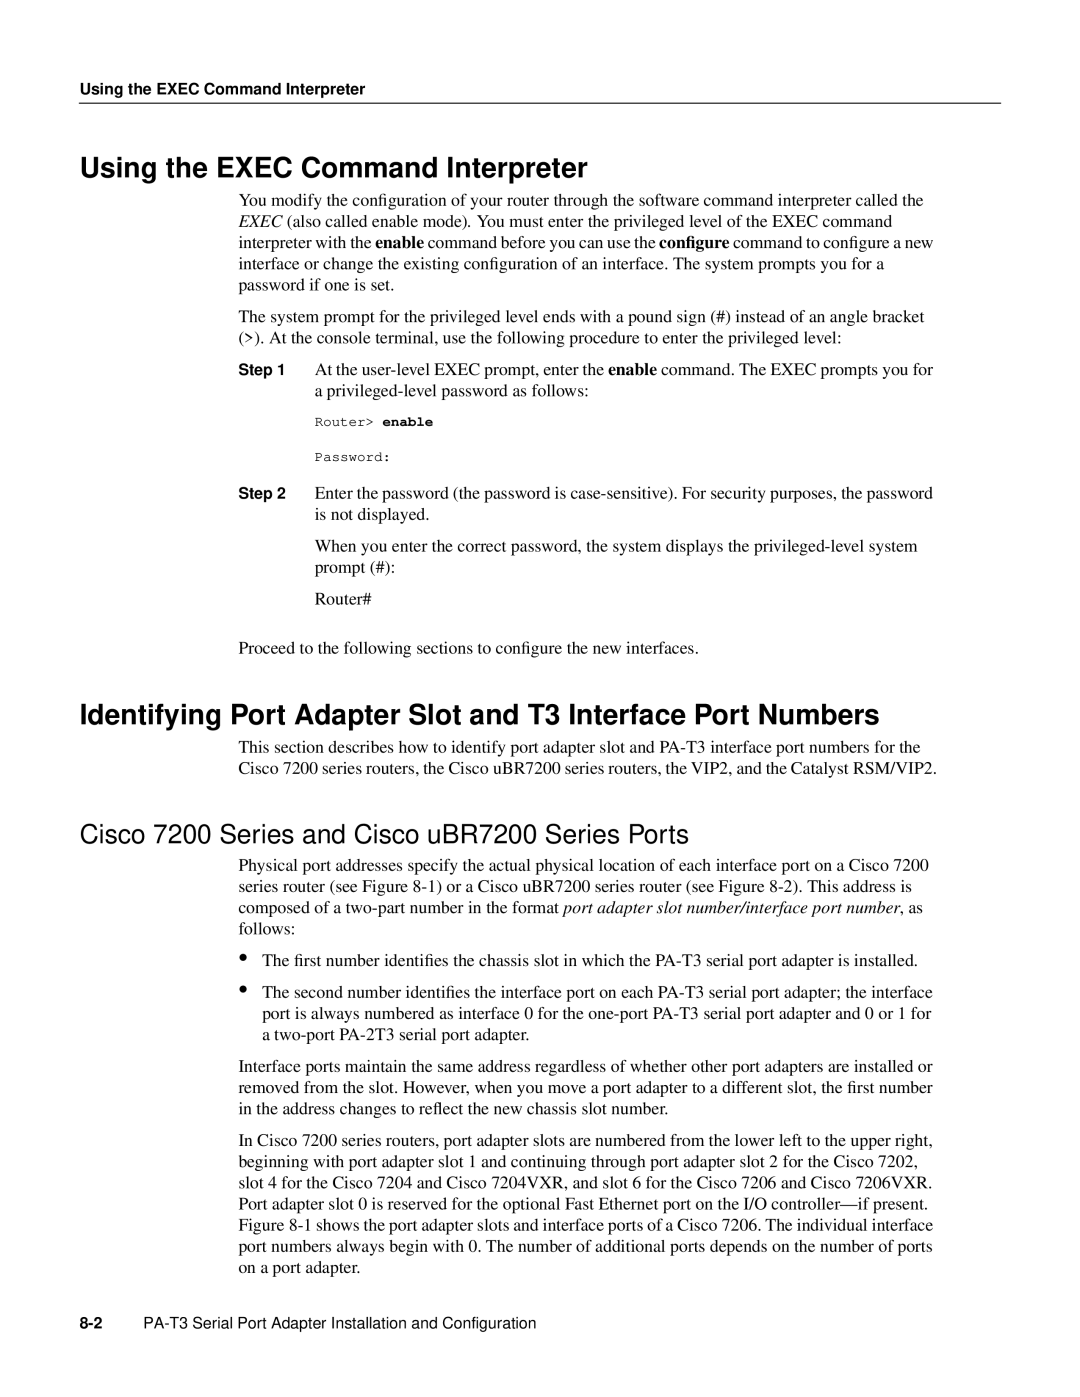 Cisco Systems PA-T3 manual Using the EXEC Command Interpreter, Identifying Port Adapter Slot and T3 Interface Port Numbers 